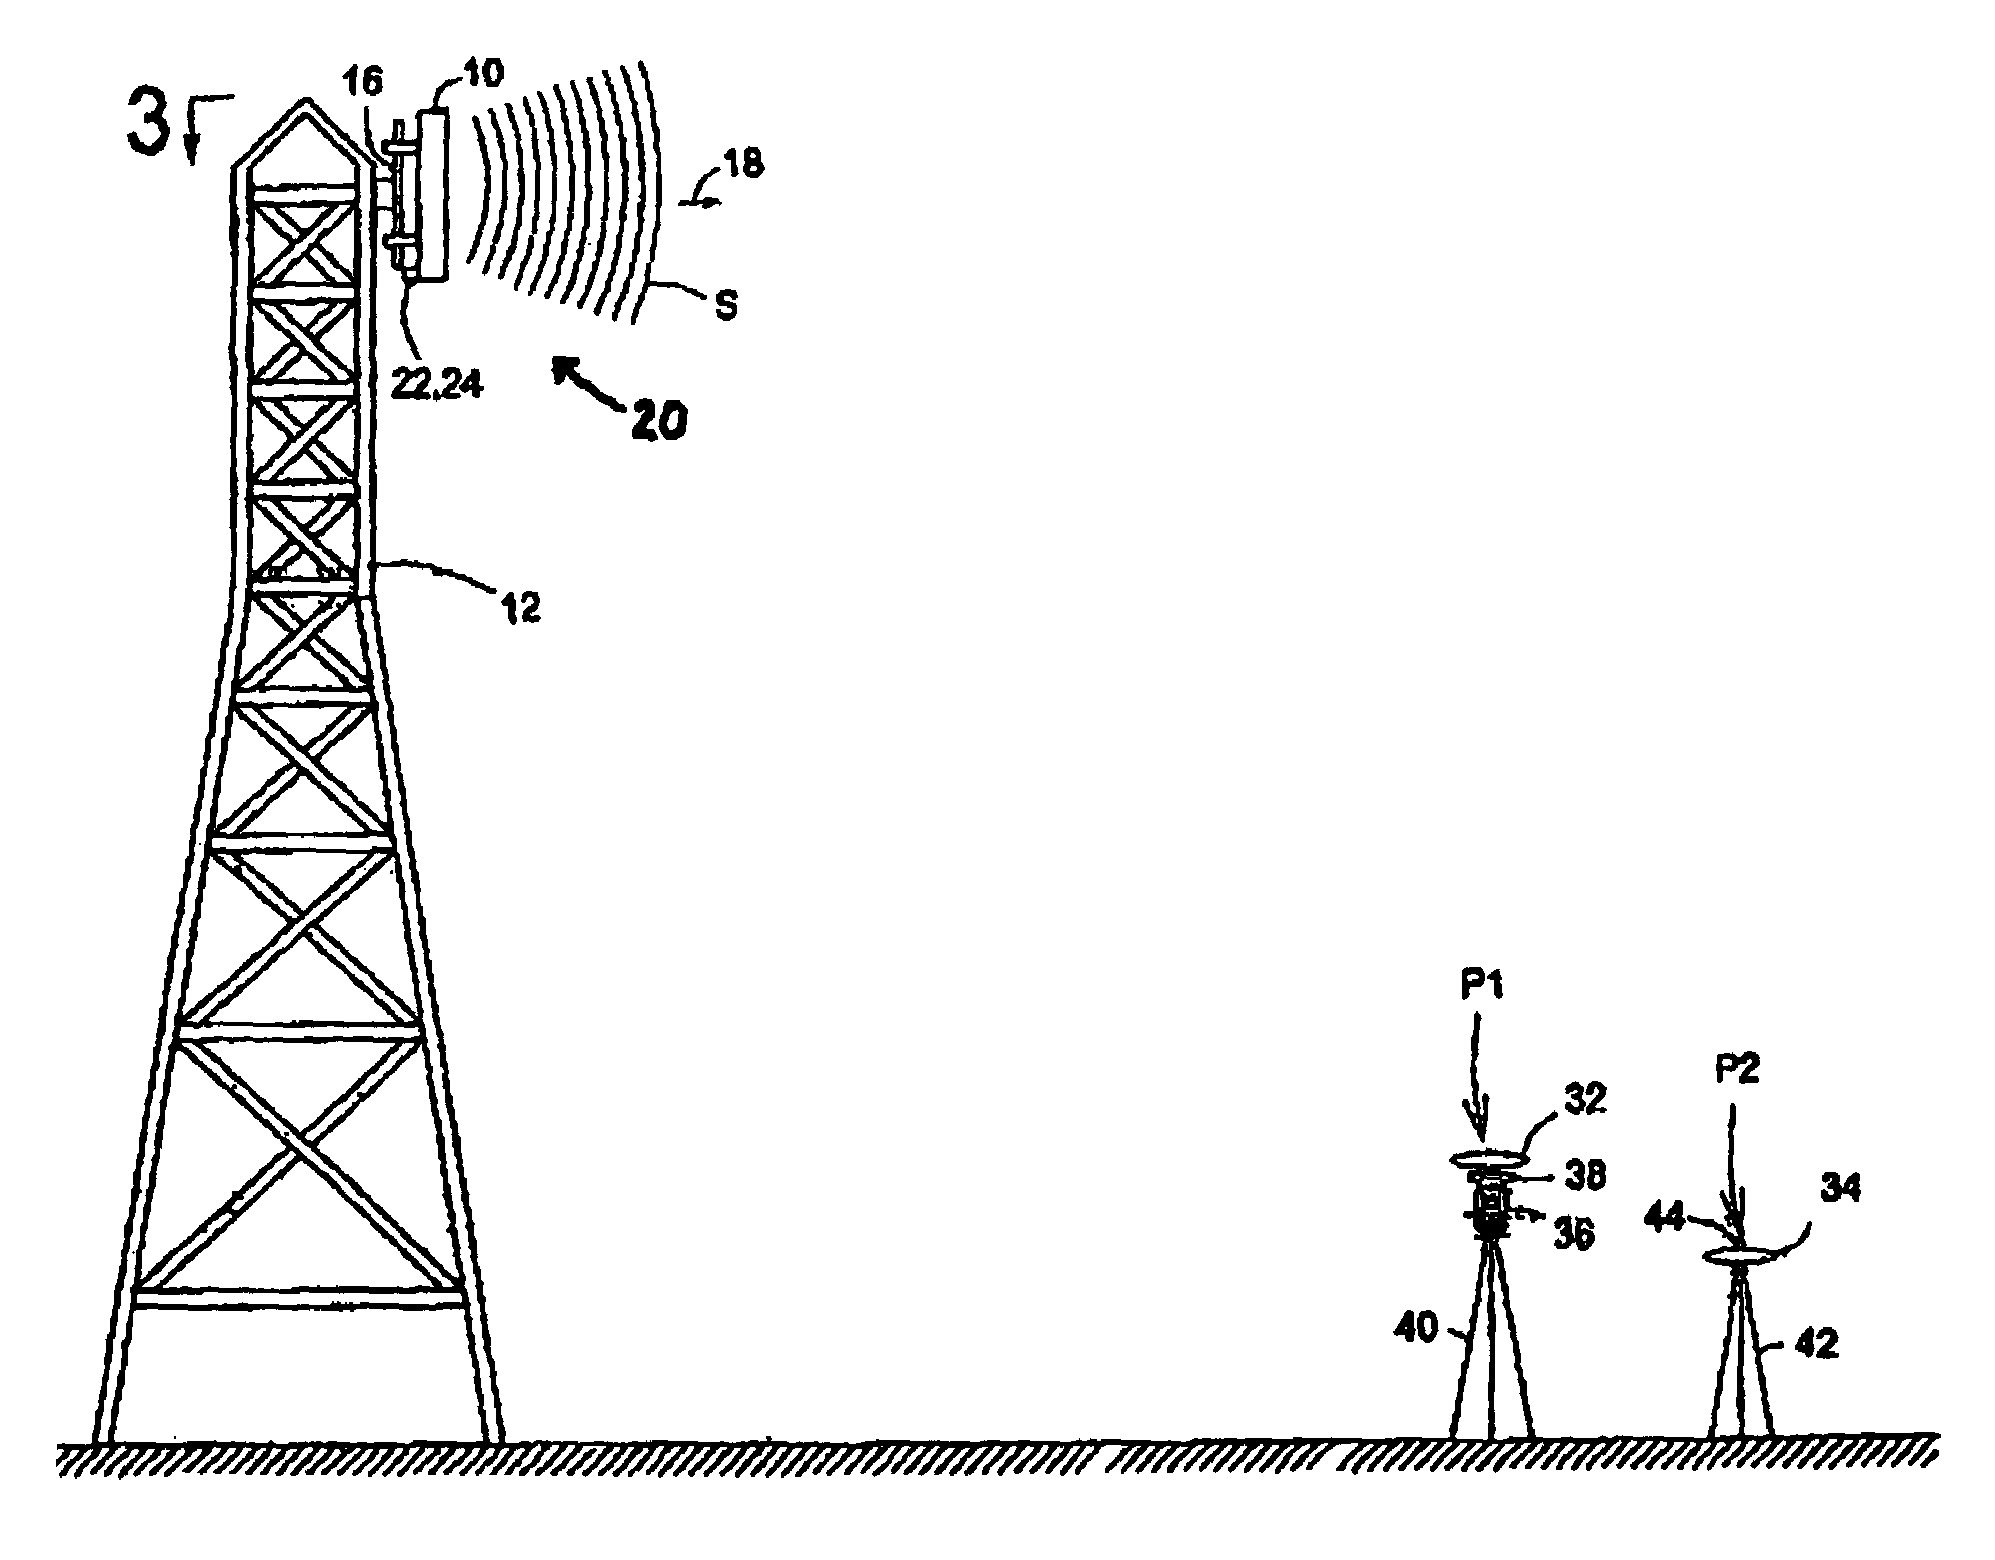 Antenna alignment system and method